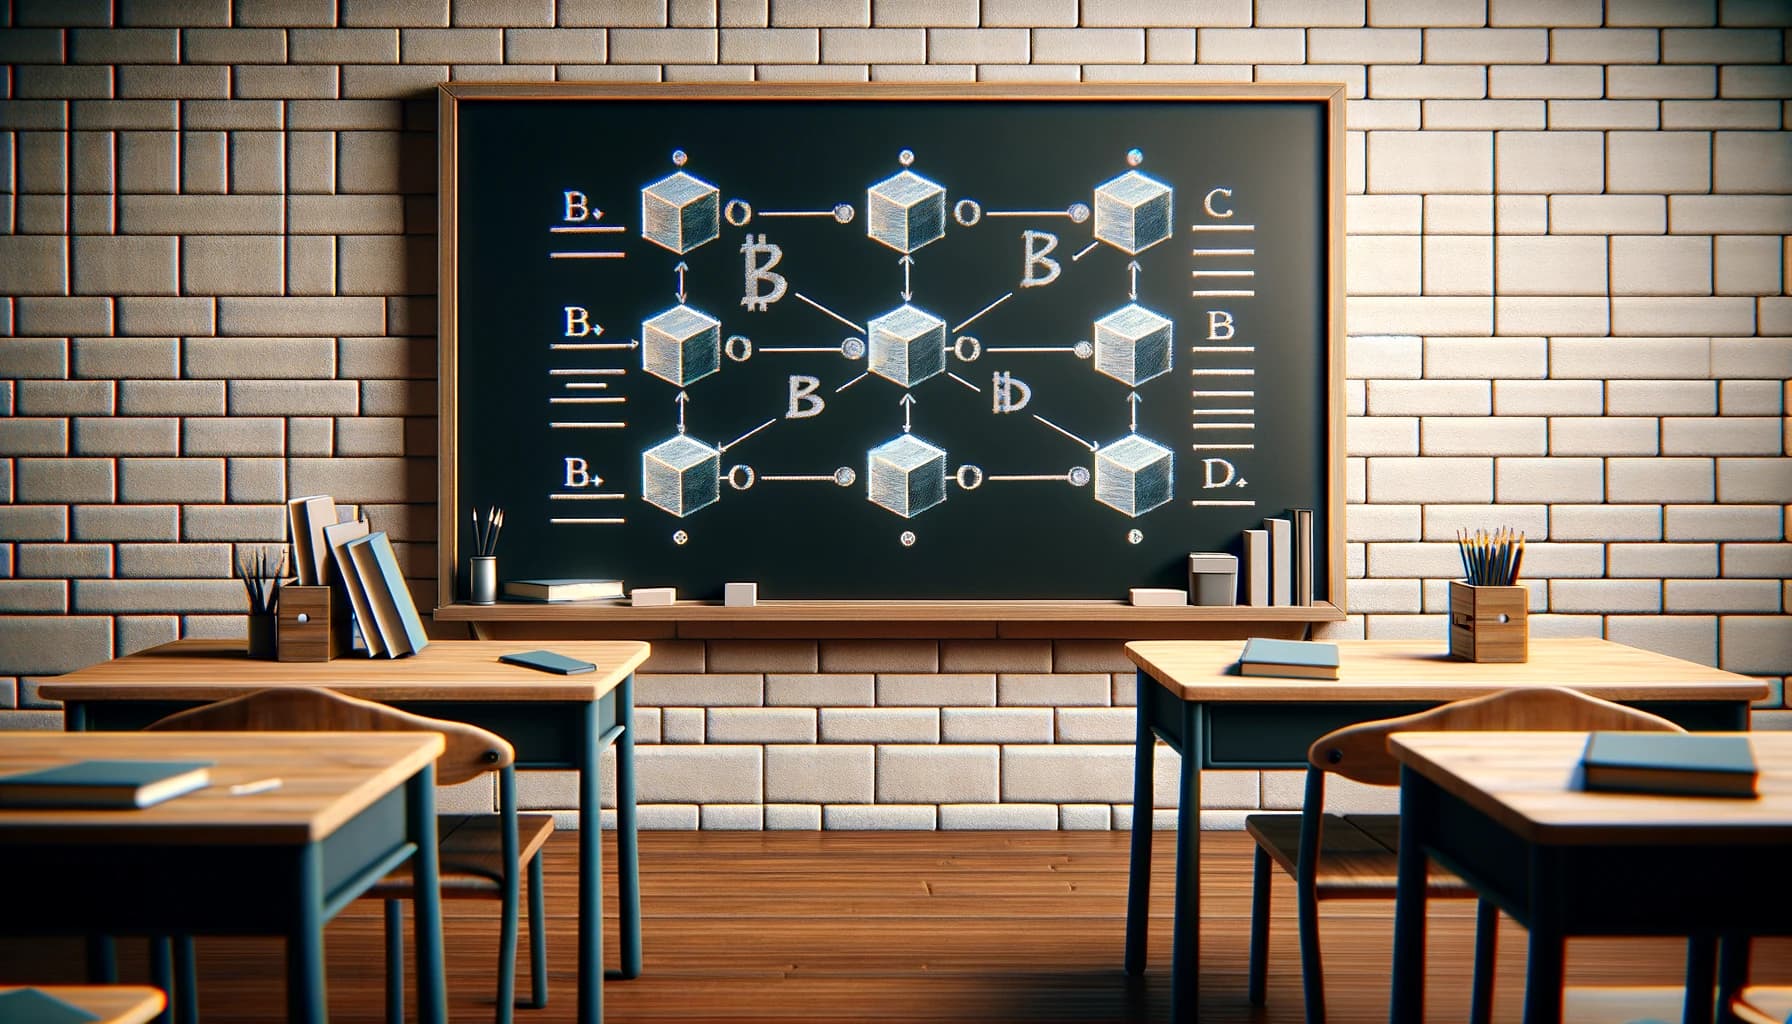 a classroom with student's desks facing the blackboard with a blockchain drawn on it